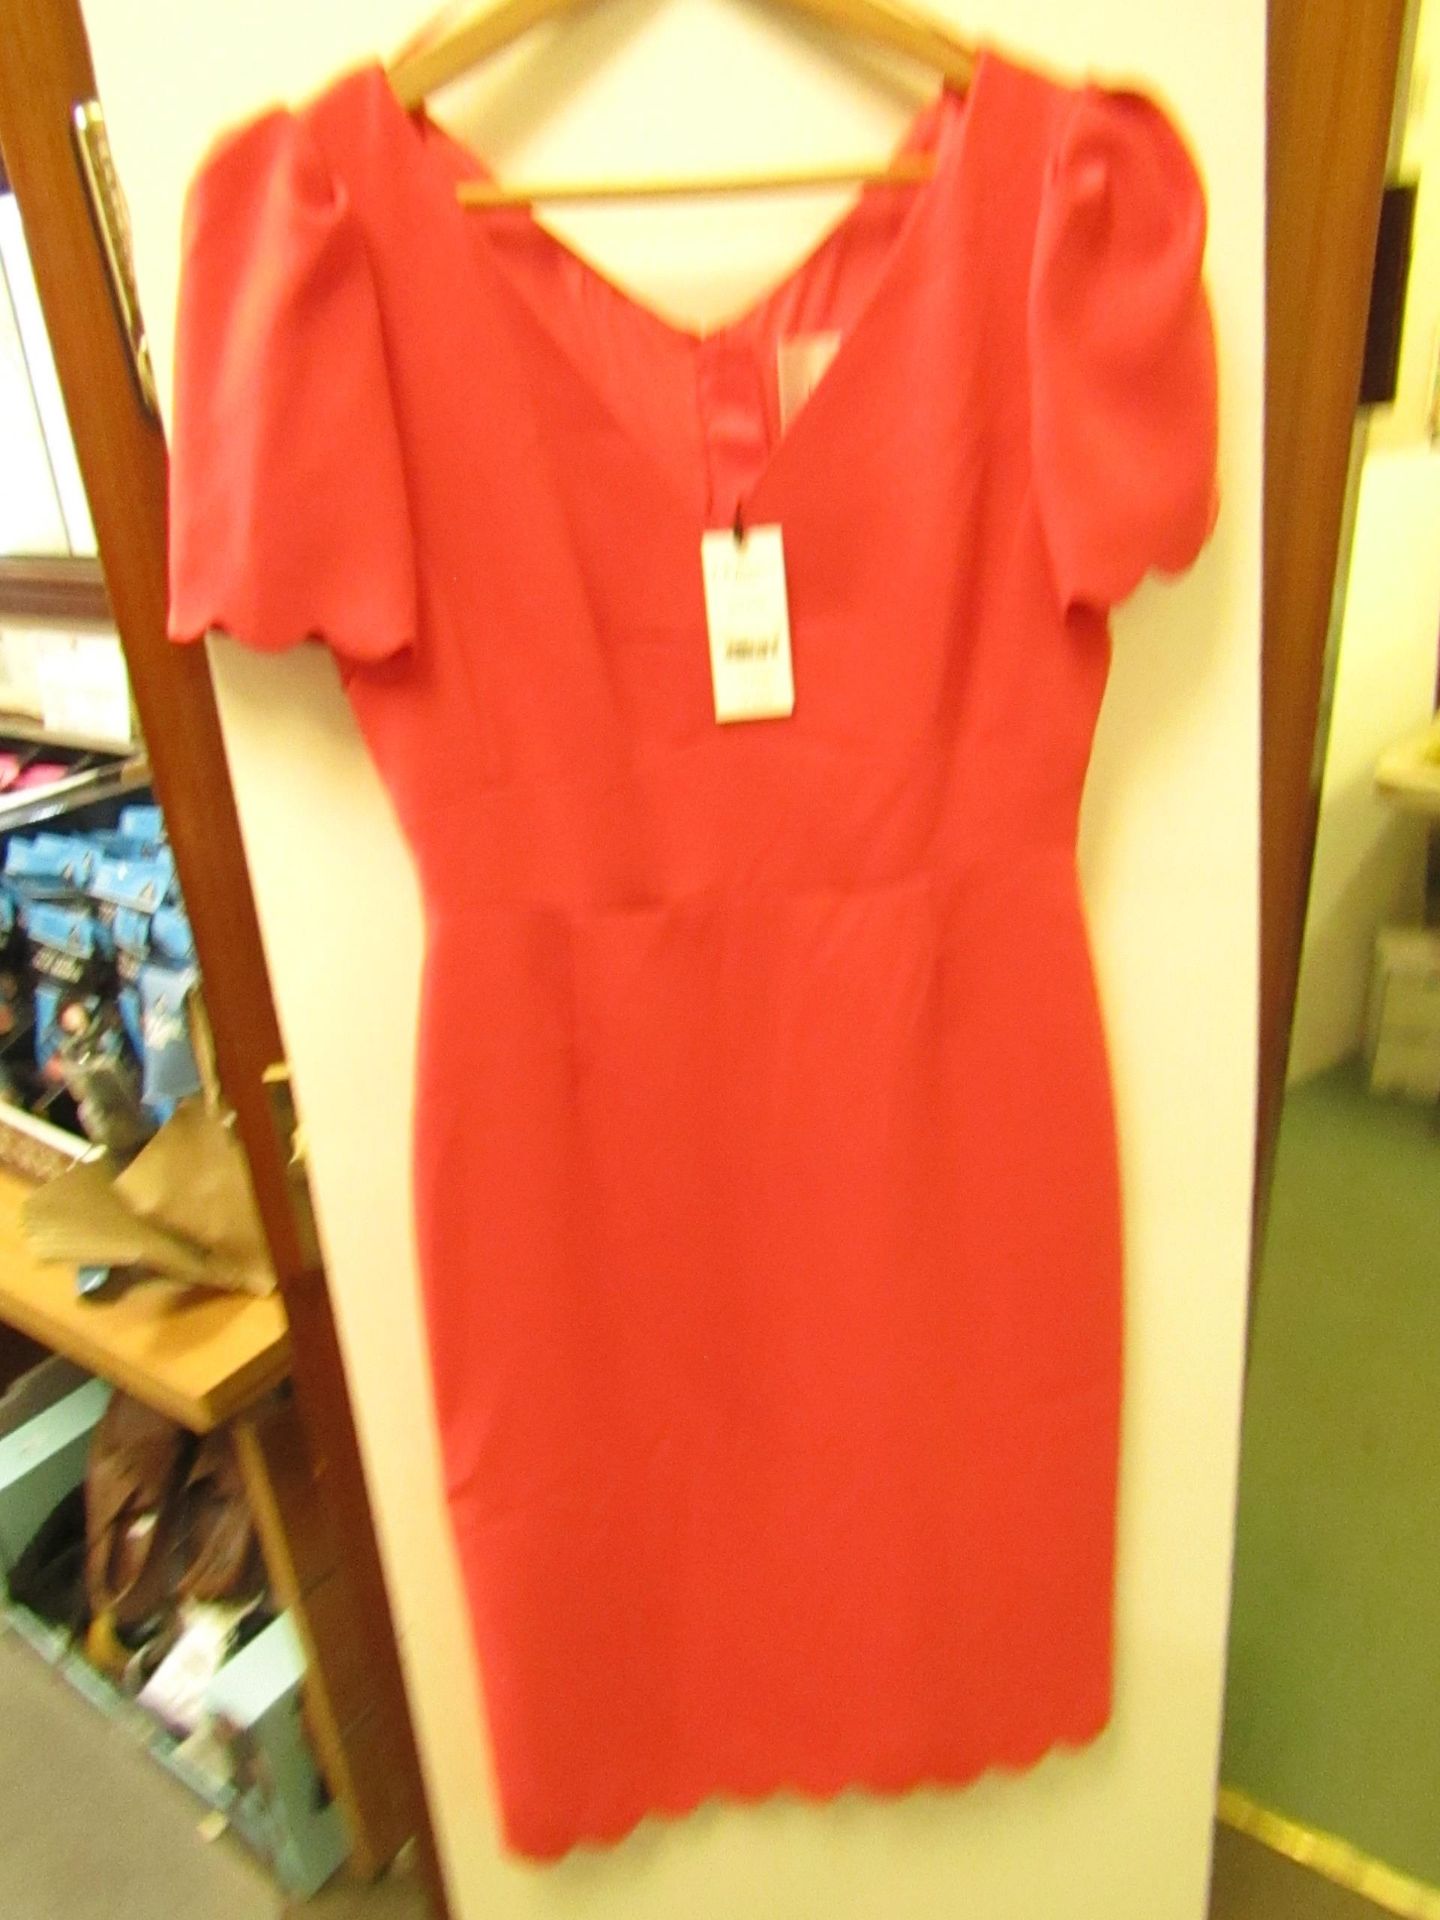 L K Bennett London Enid Geranium Dress size 12 RRP £250 new with tag see image for design